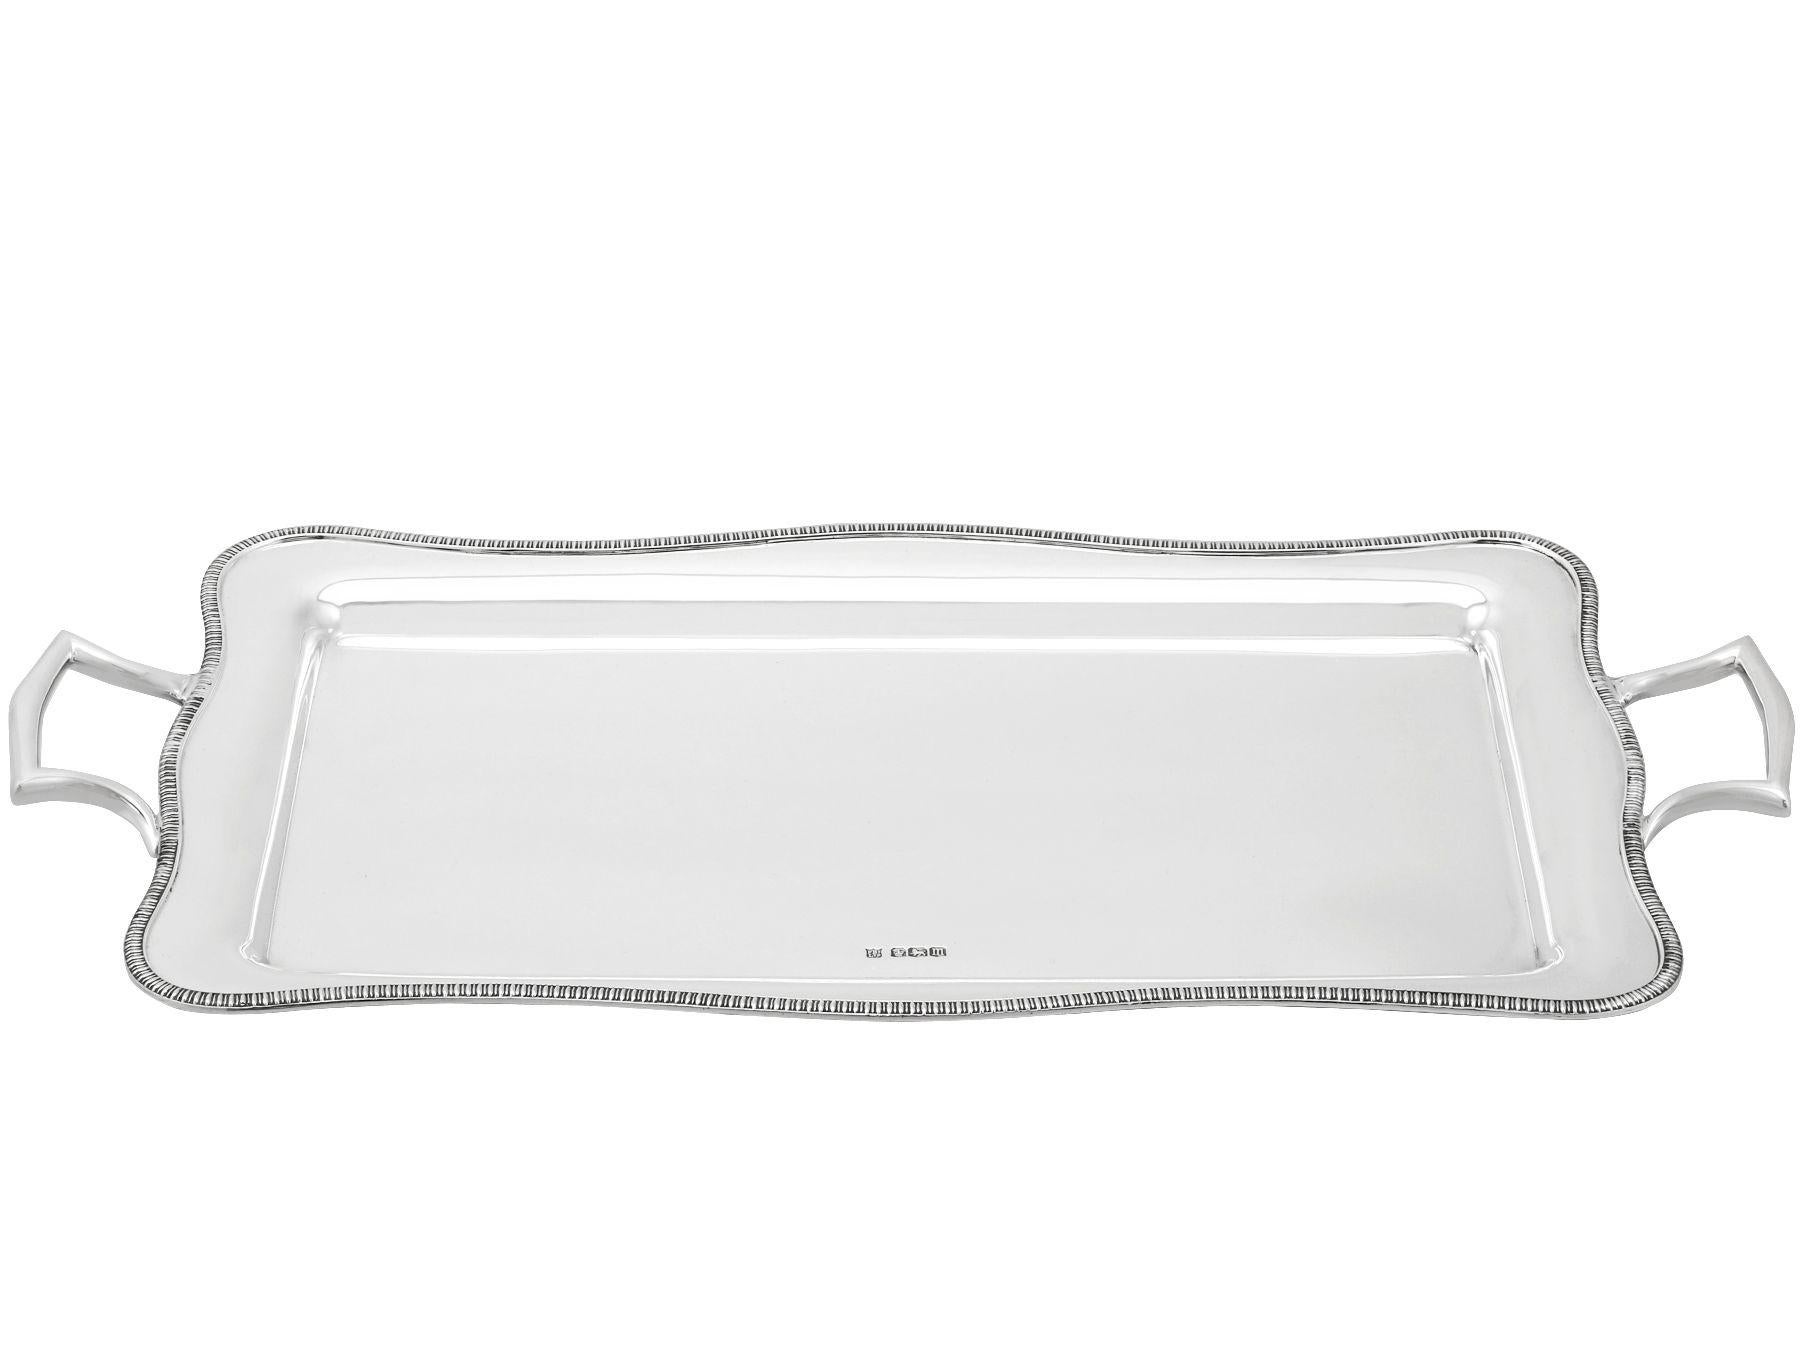 An exceptional, fine and impressive antique George V English sterling silver two handled drinks tray; an addition to our silver tray collection.

This exceptional antique George V sterling silver tray has a rounded rectangular form.

The surface of